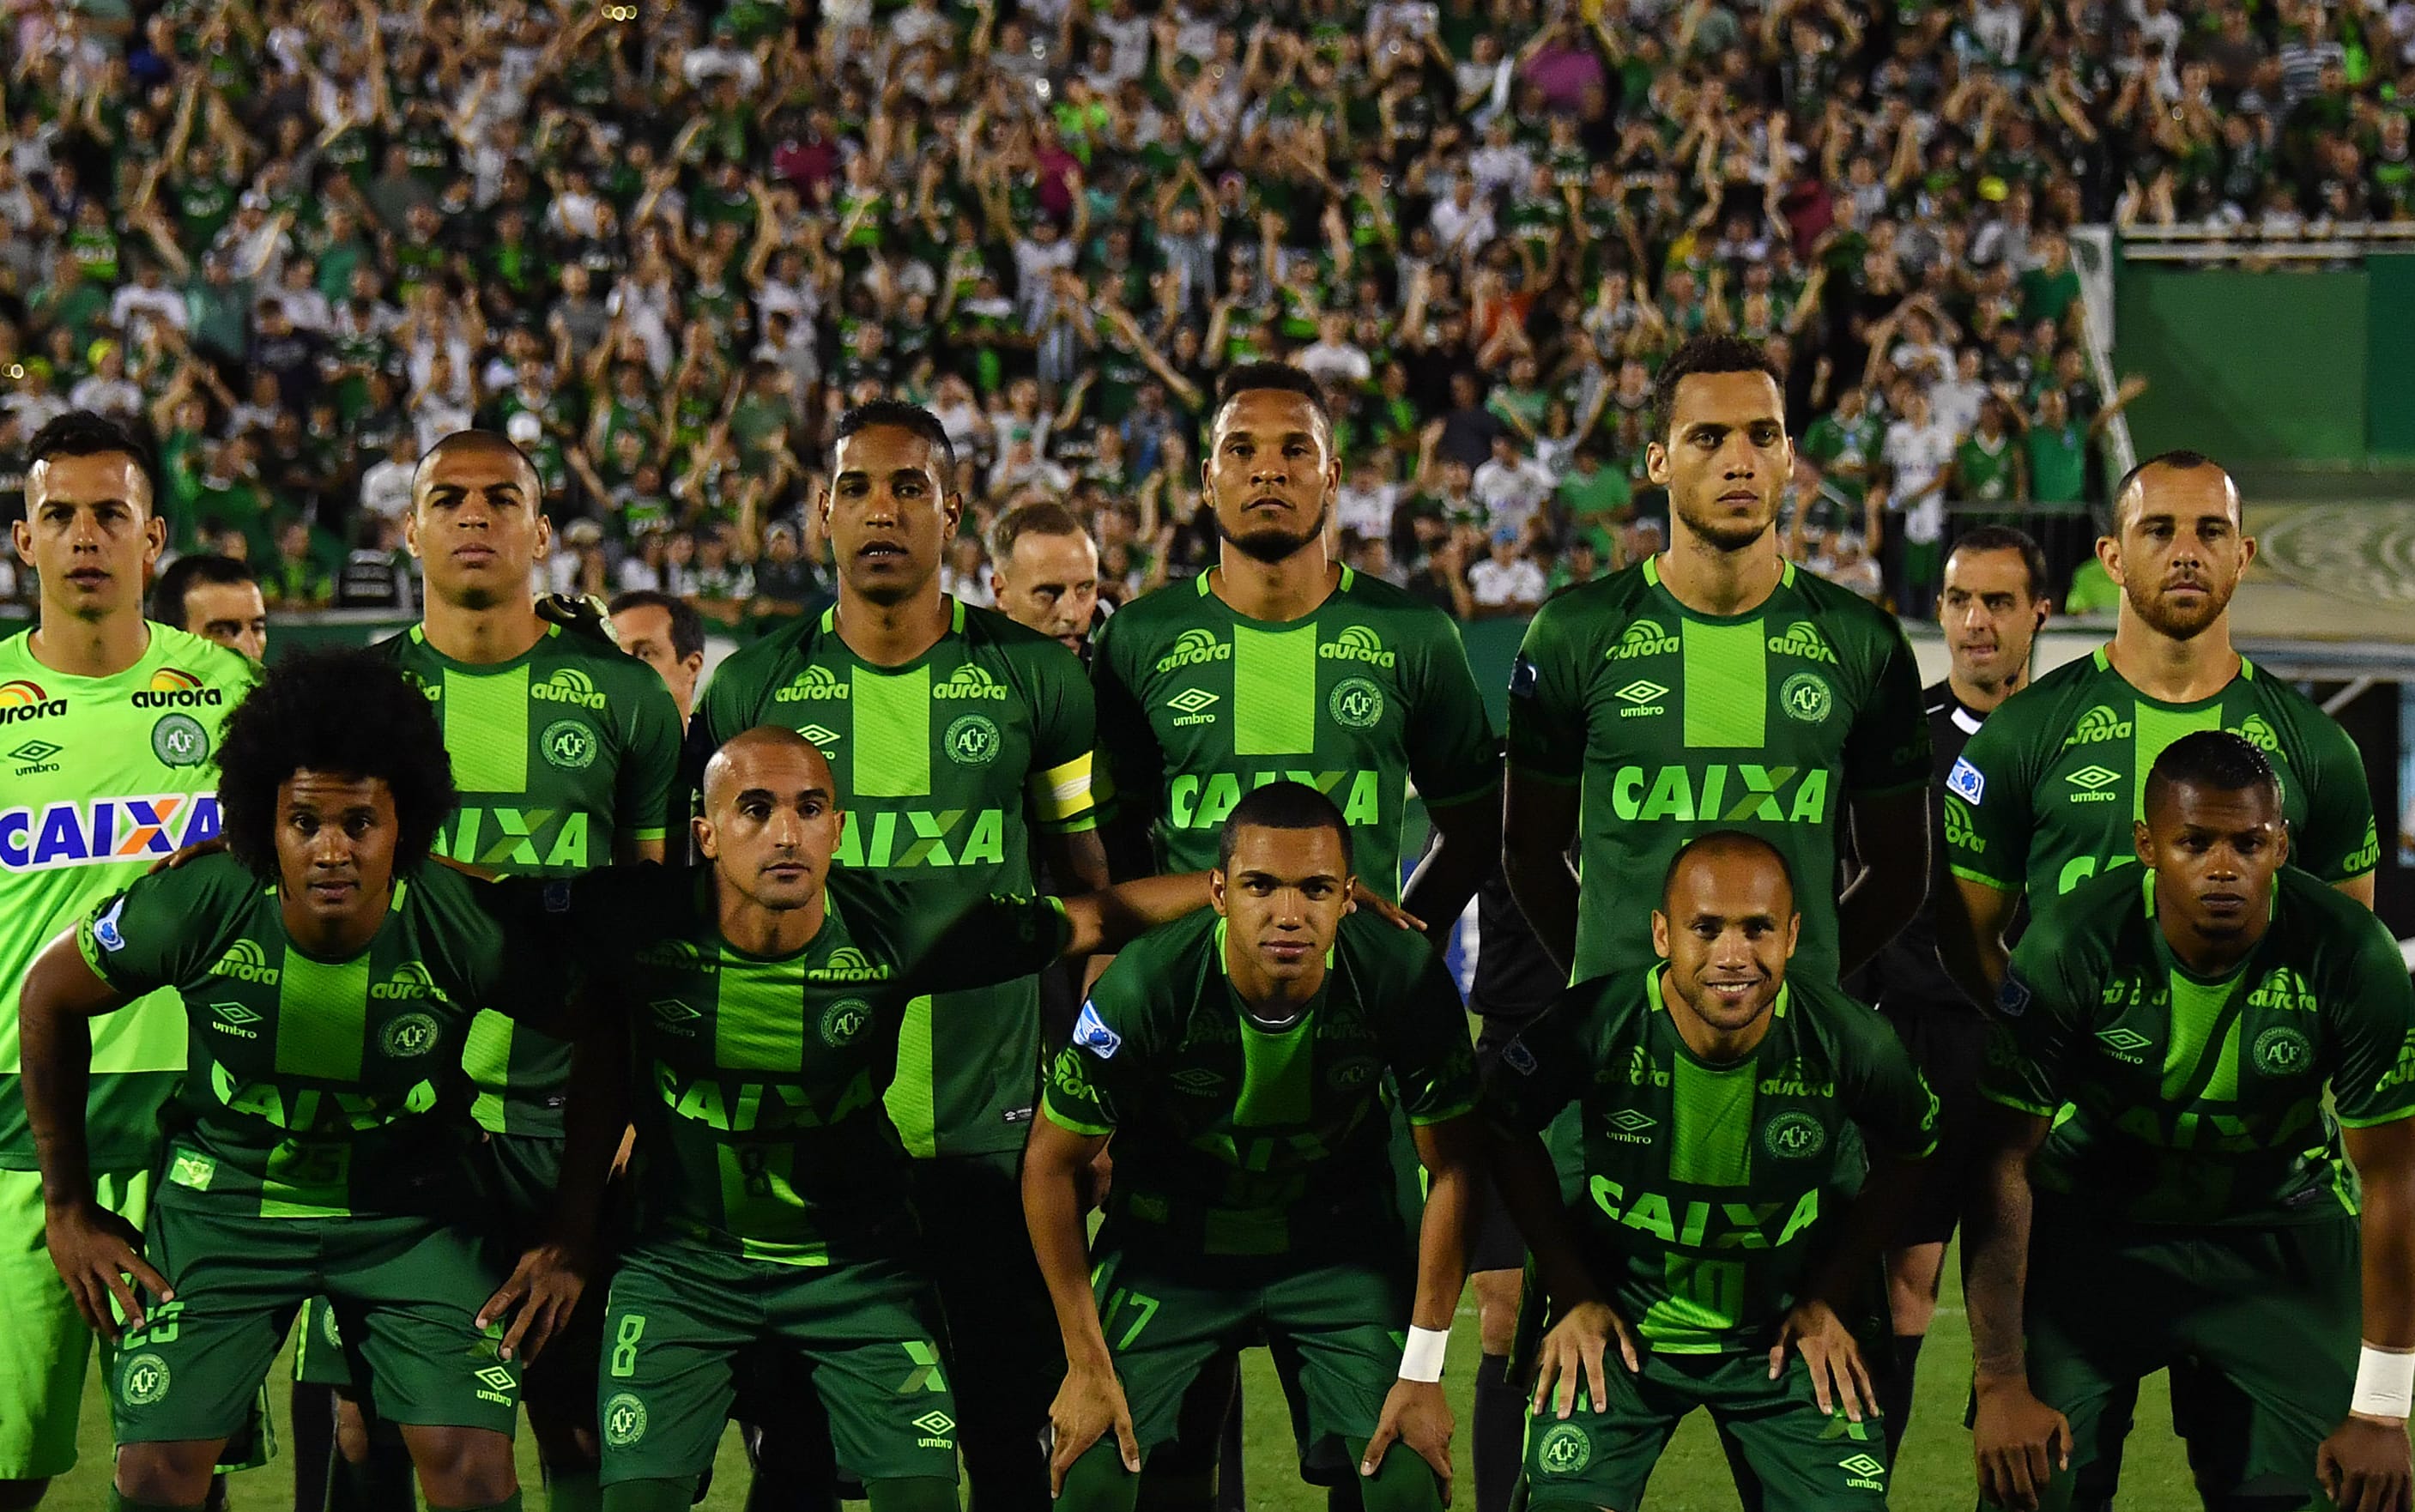 This file photo taken on November 24, 2016 shows Brazil's Chapecoense players posing for pictures during their 2016 Copa Sudamericana semifinal second leg football match against Argentina's San Lorenzo held at Arena Conda stadium, in Chapeco, Brazil.